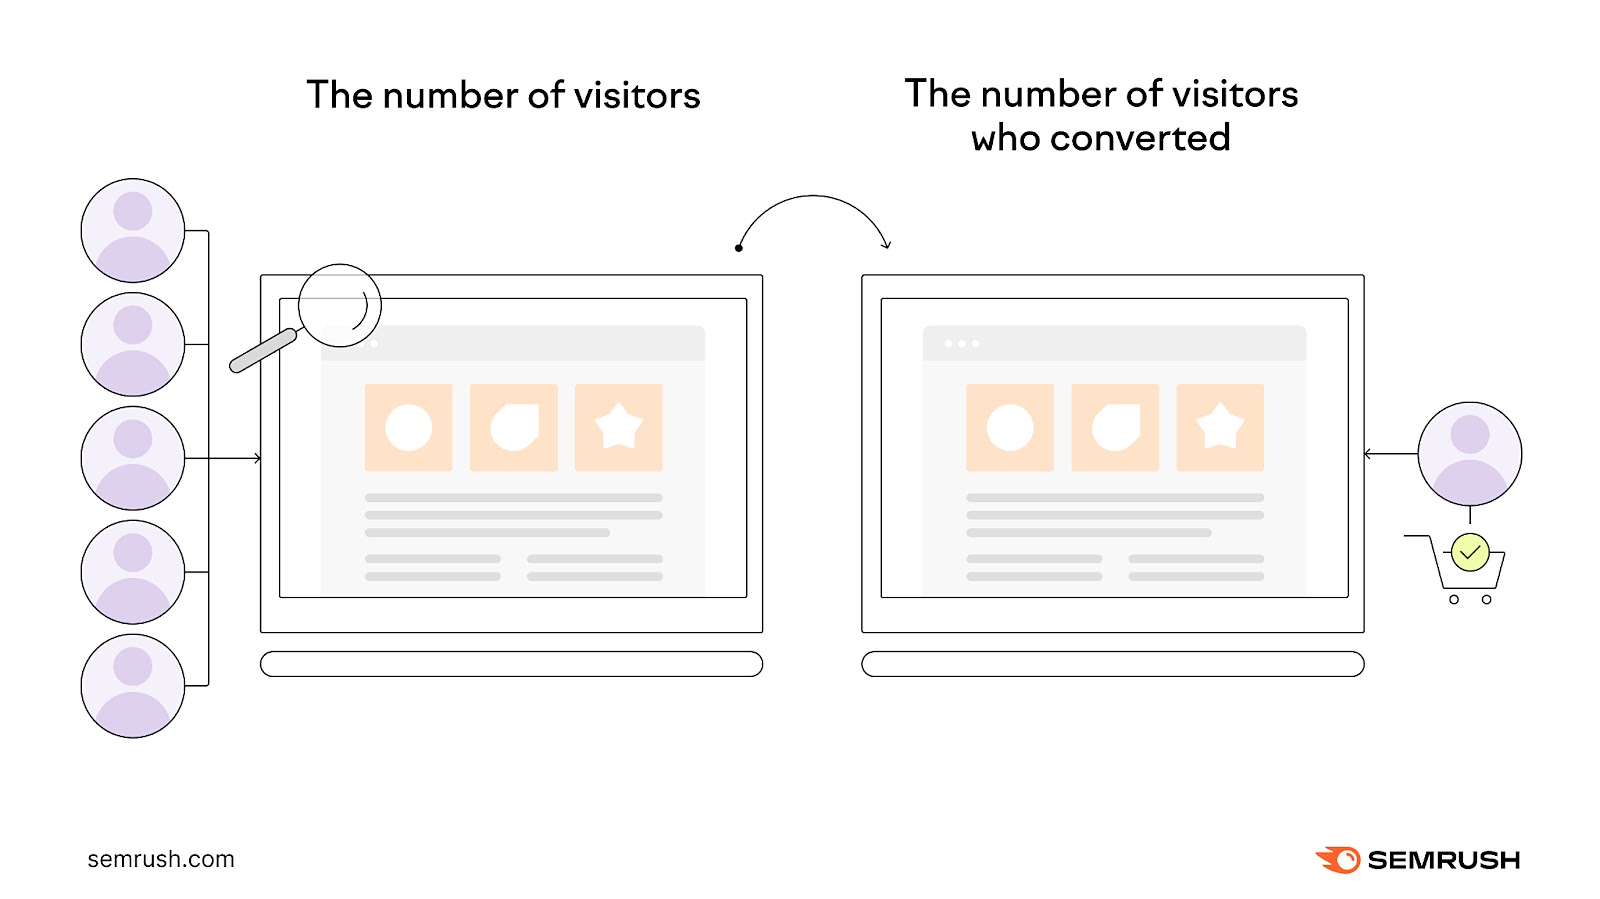 An infographic showing the number of visitors to a page (left) and the number of visitors who converted (right)